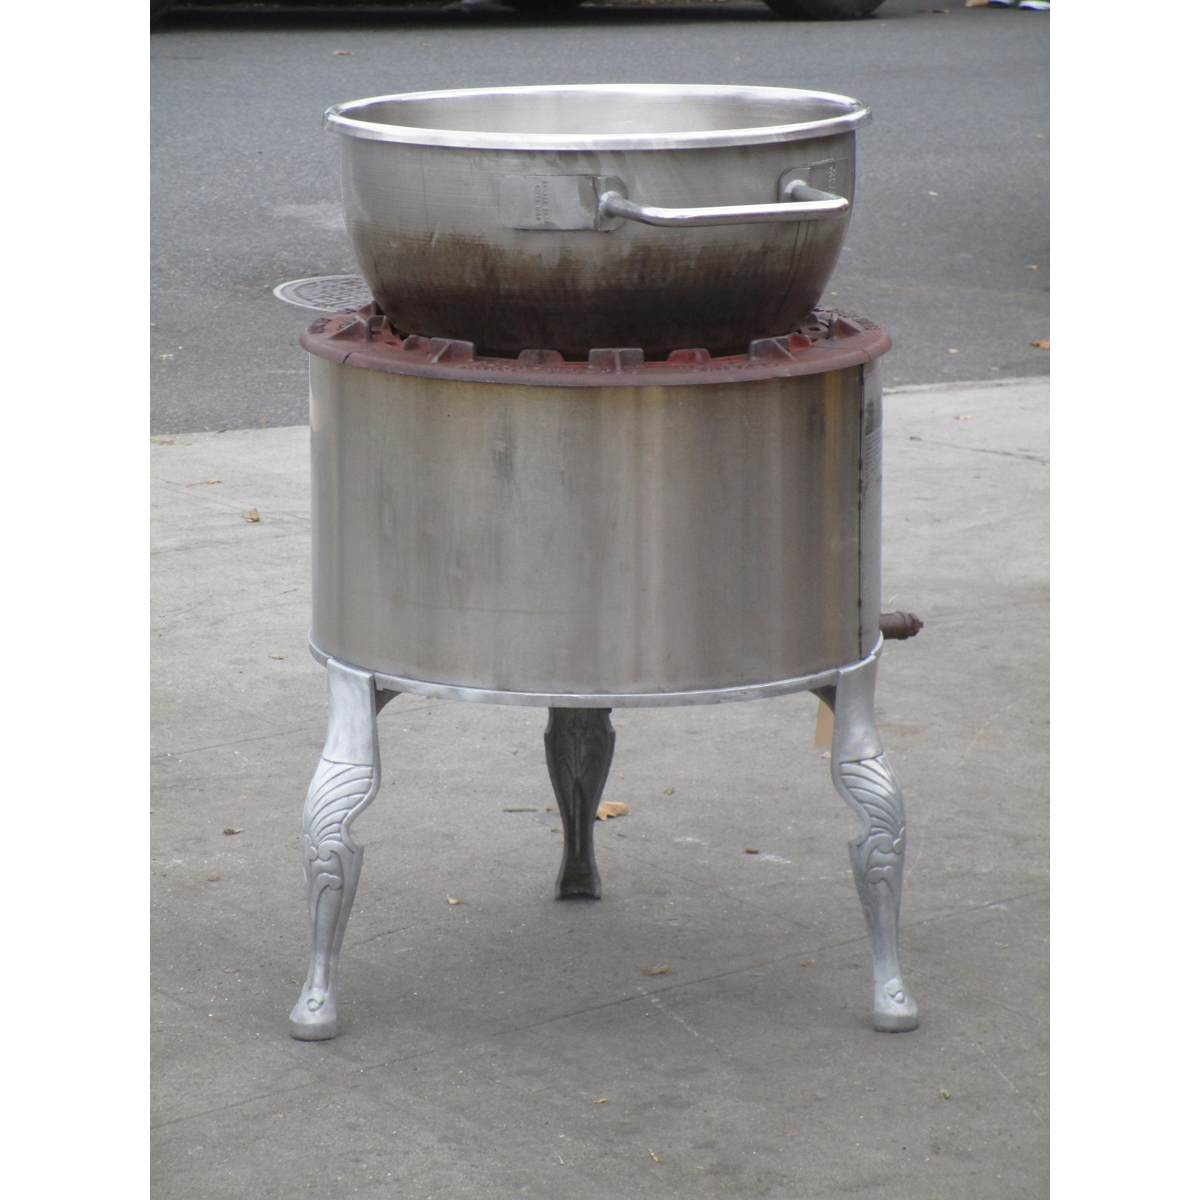 Savage Bros. #20 Candy Stove Model 0220, Good Condition image 1